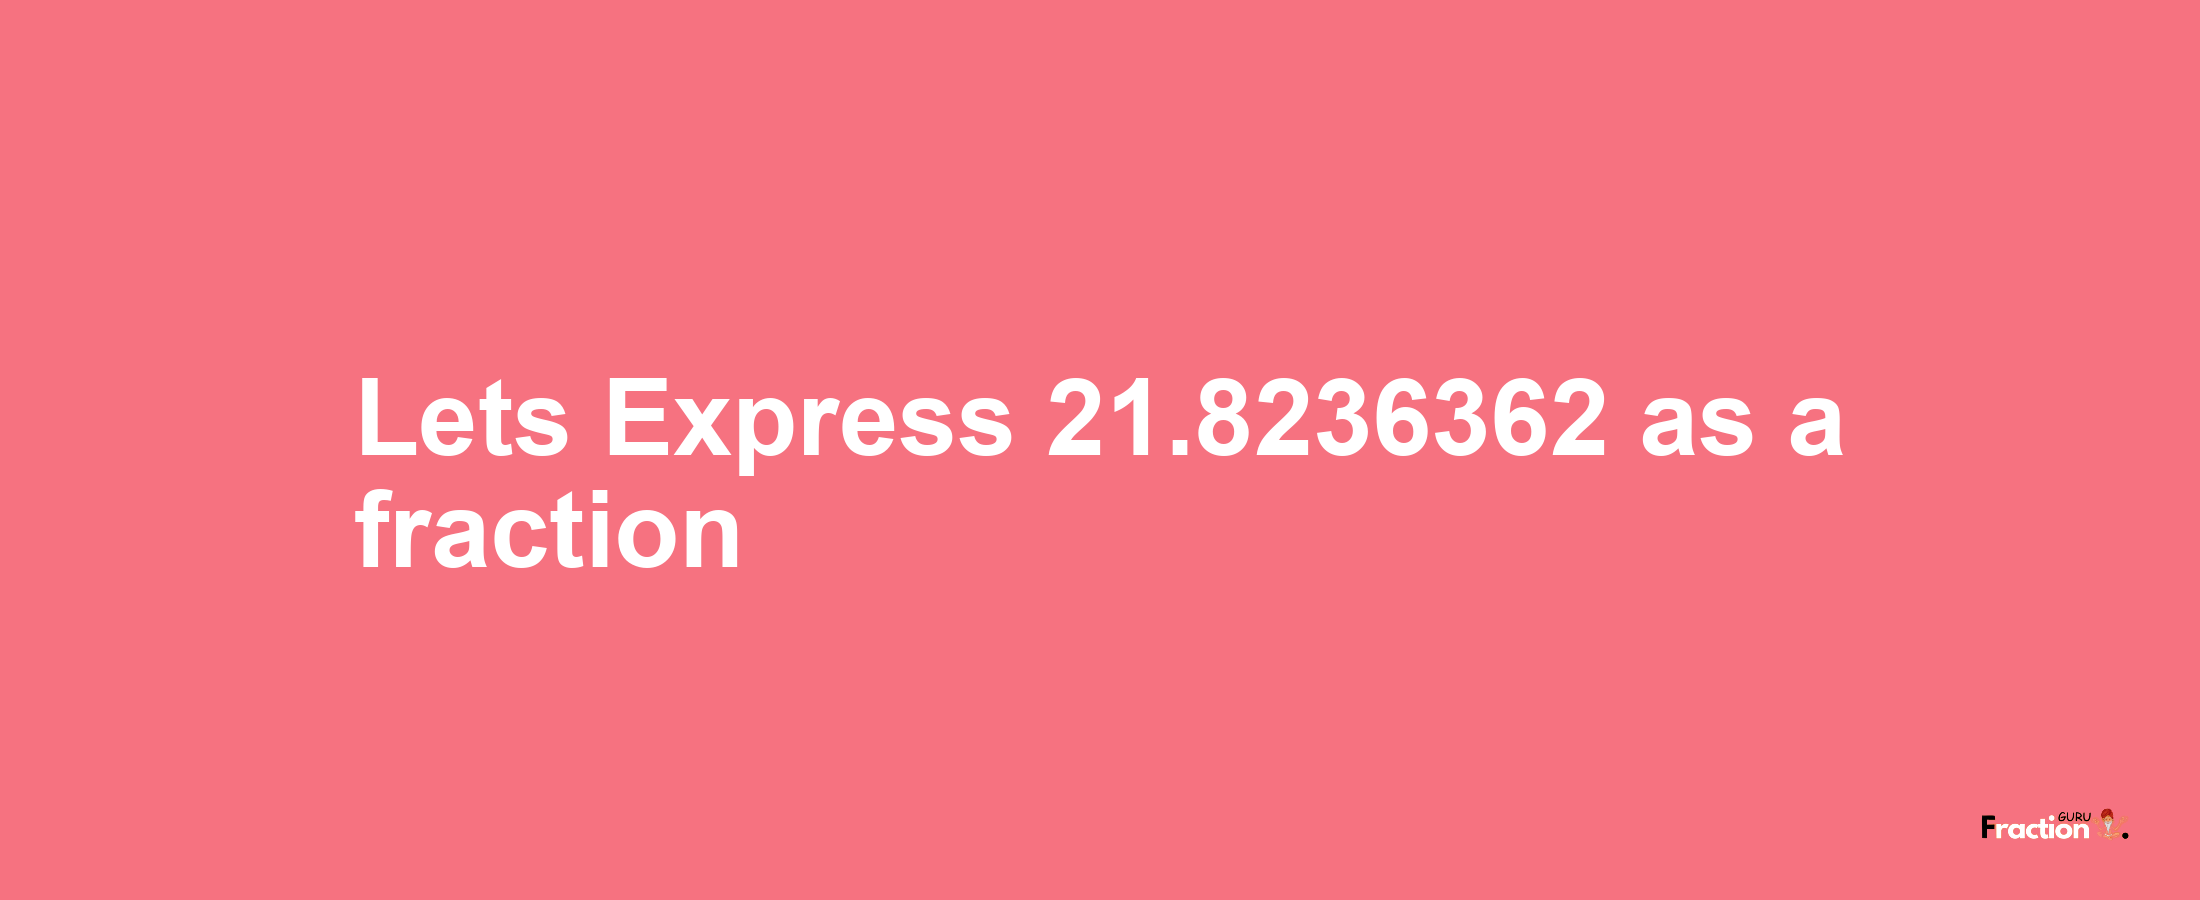 Lets Express 21.8236362 as afraction